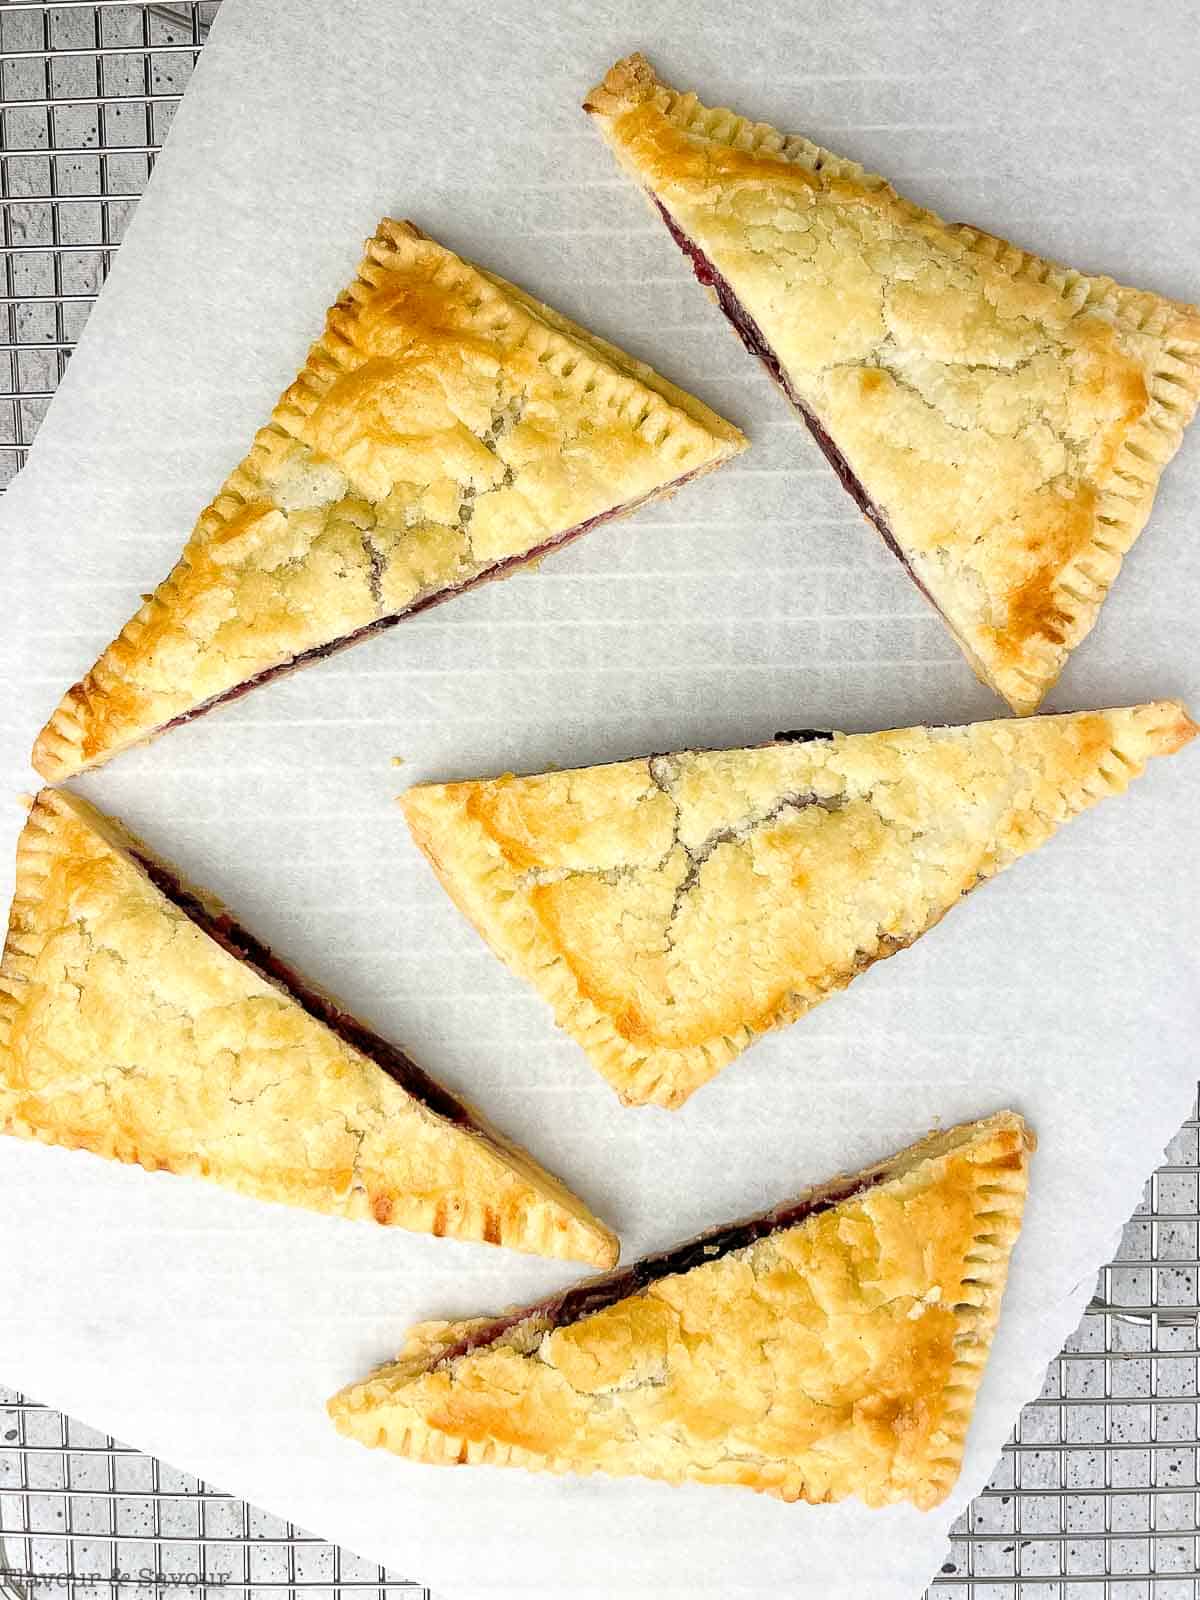 Overhead view of cherry hand pies sliced in half on the diagonal.